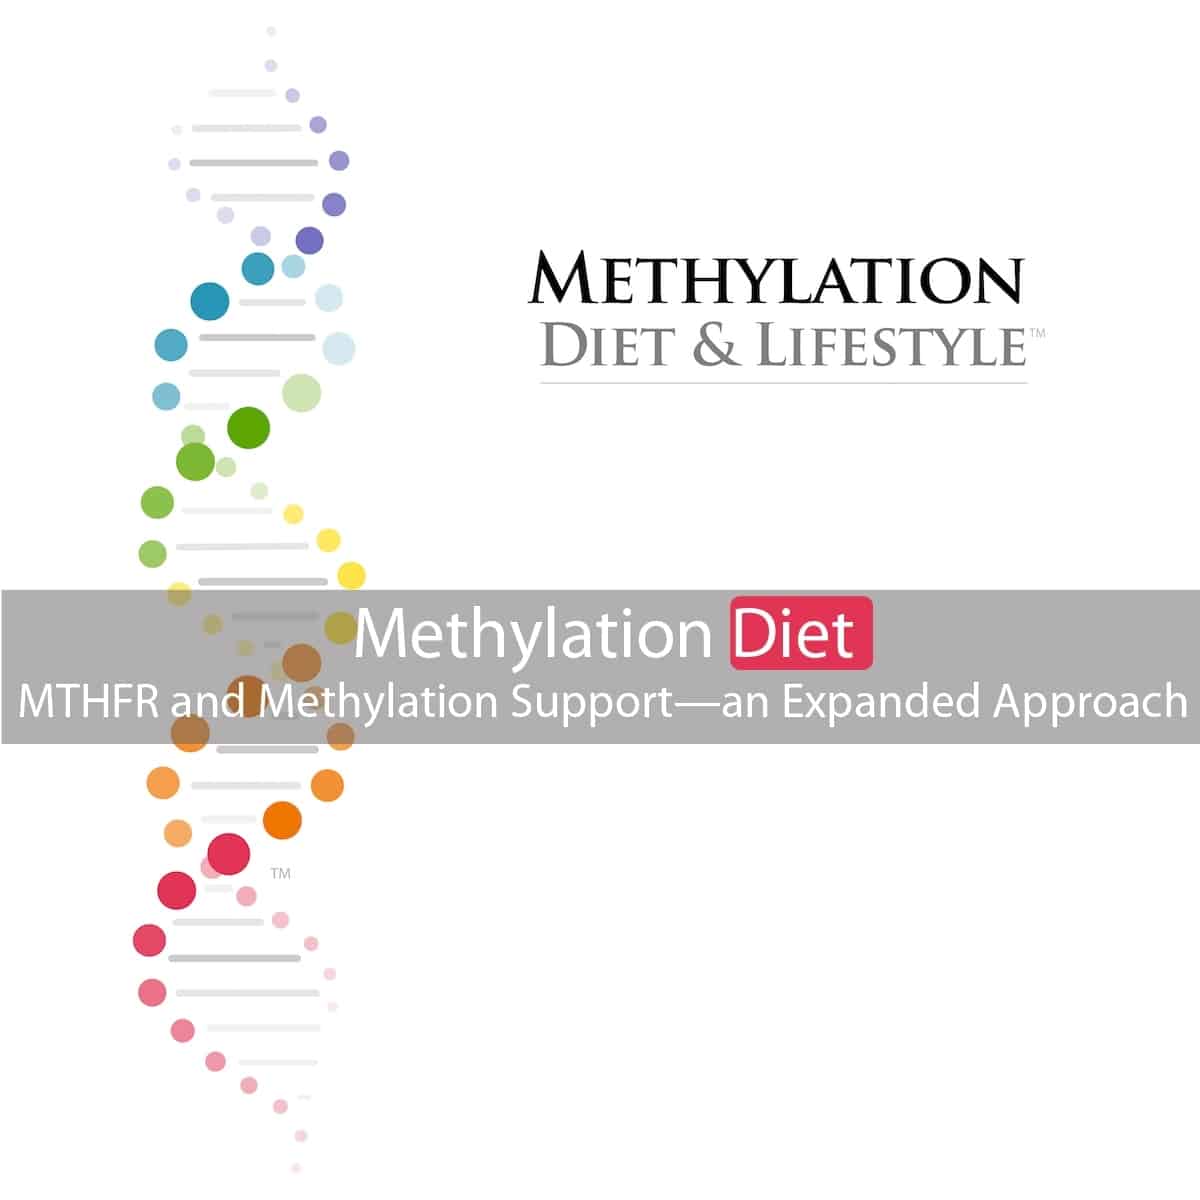 Introducing The Methylation Diet